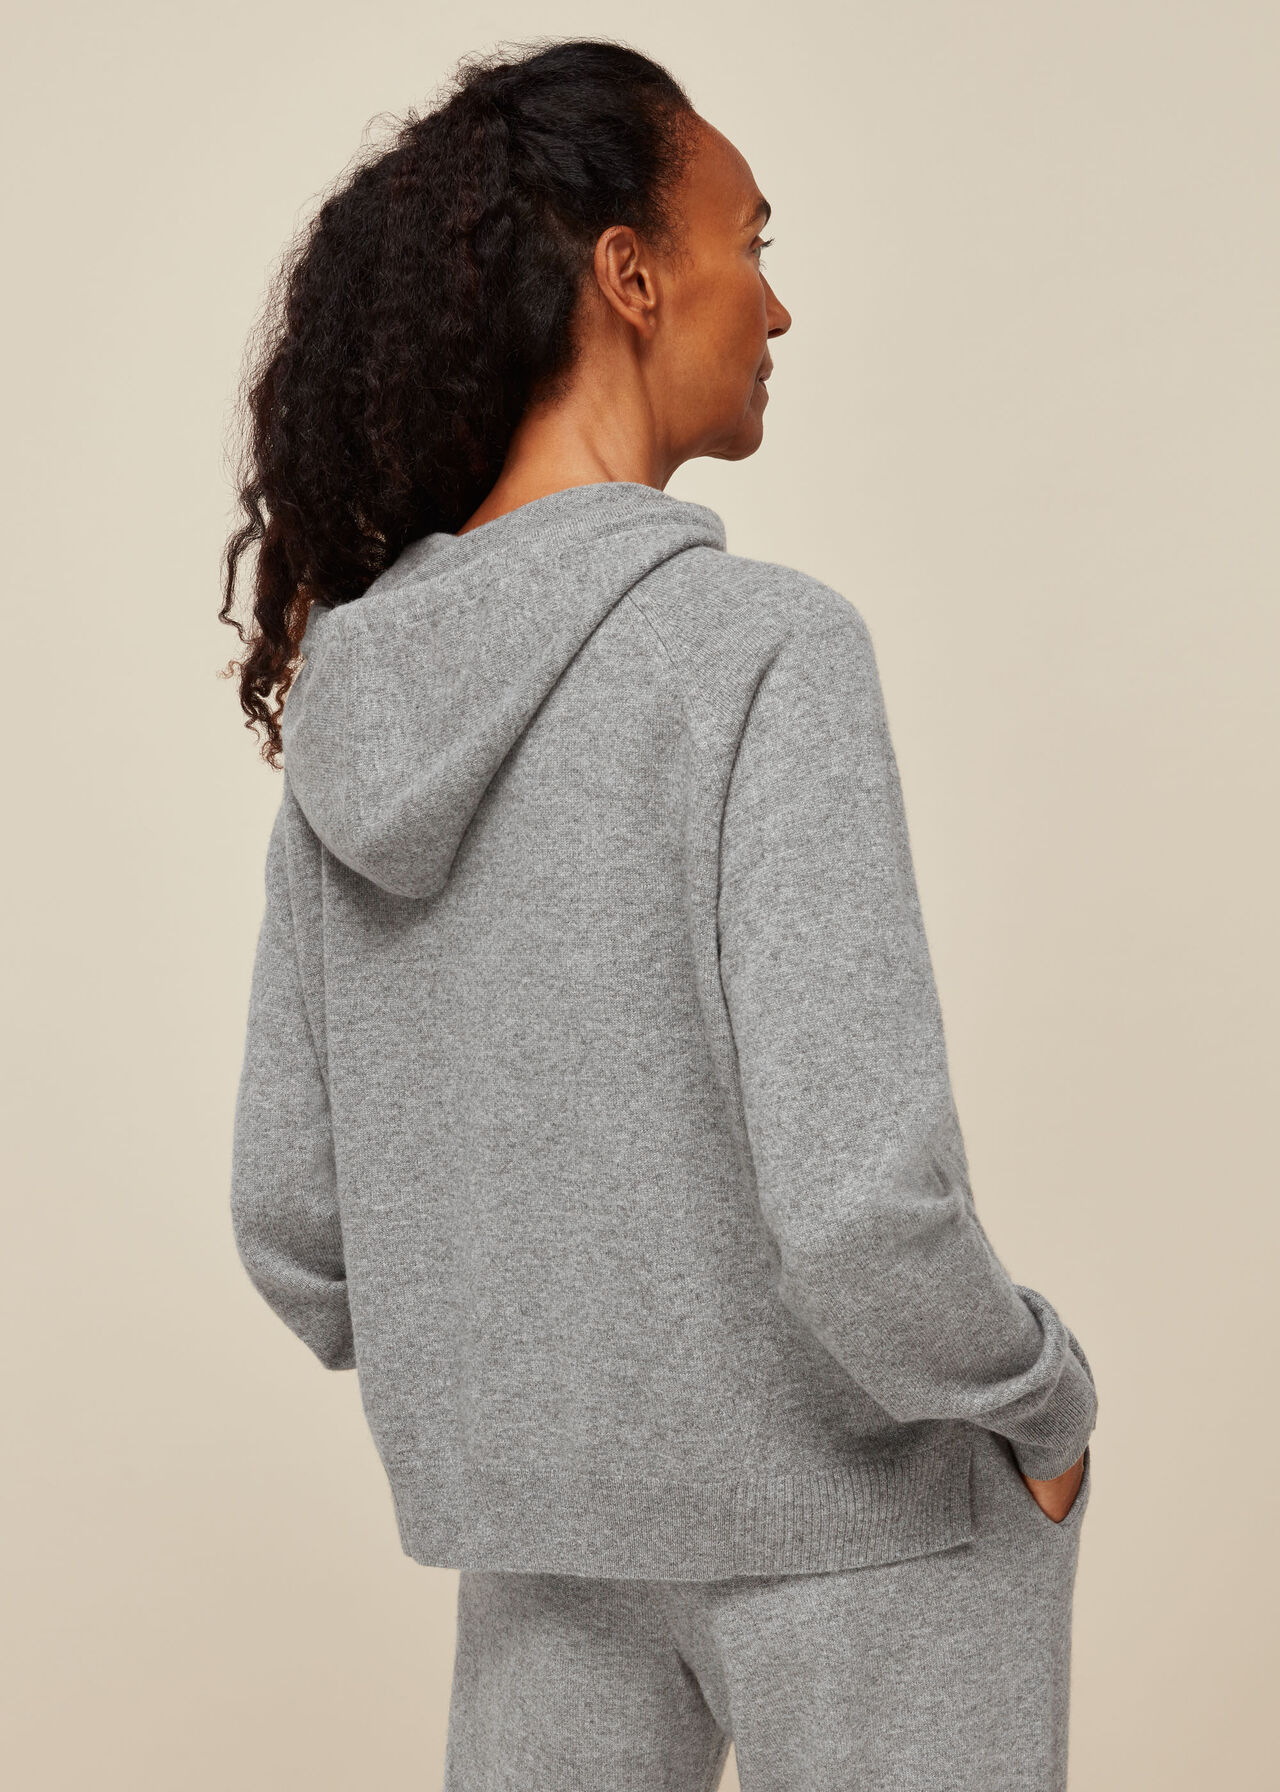 Cashmere Hooded Knit